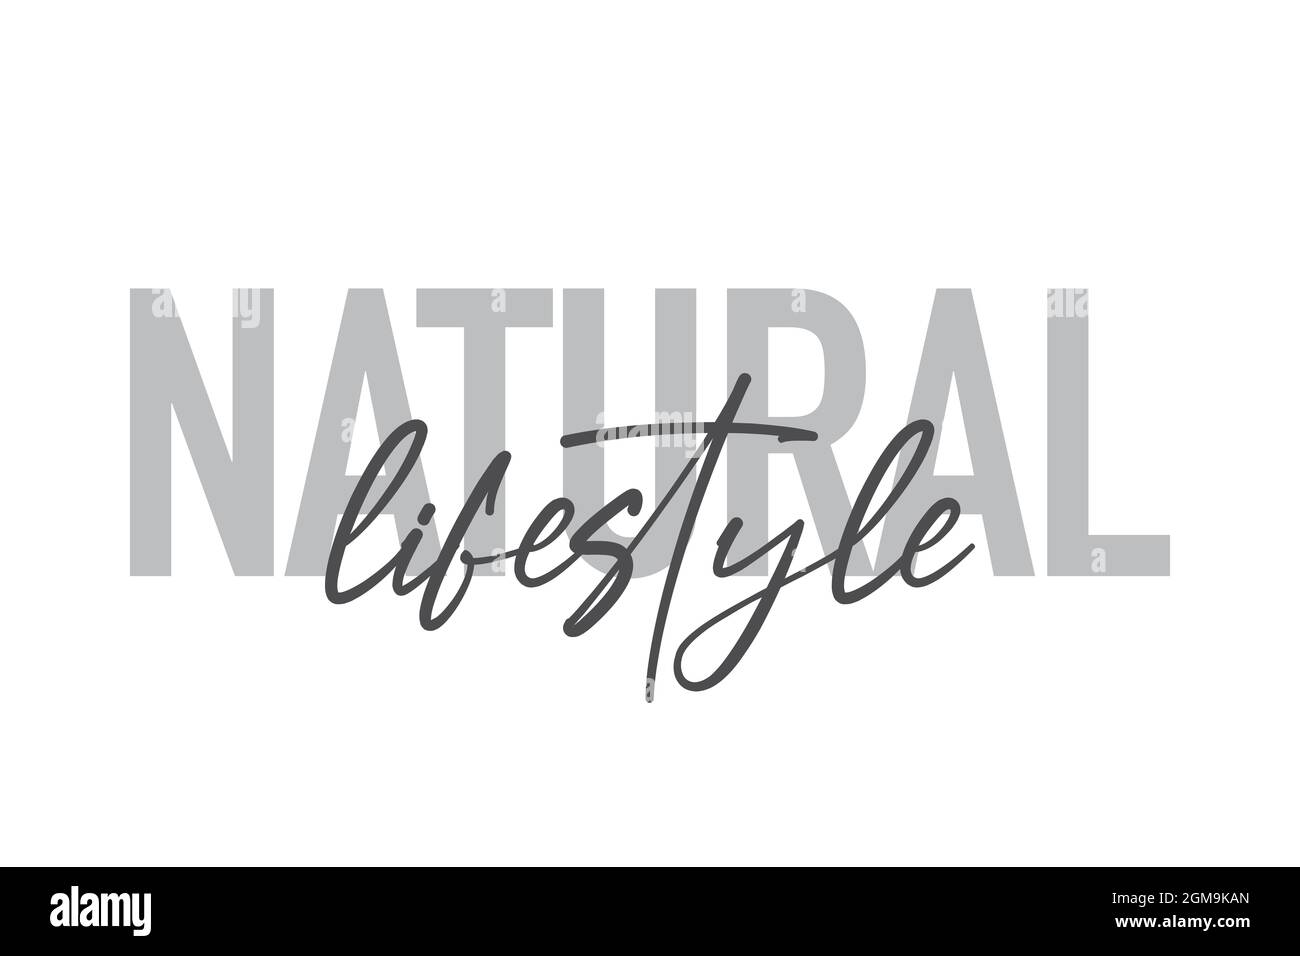 Modern, simple, minimal typographic design of a saying 'Natural Lifestyle' in tones of grey color. Cool, urban, trendy and playful graphic vector art Stock Photo